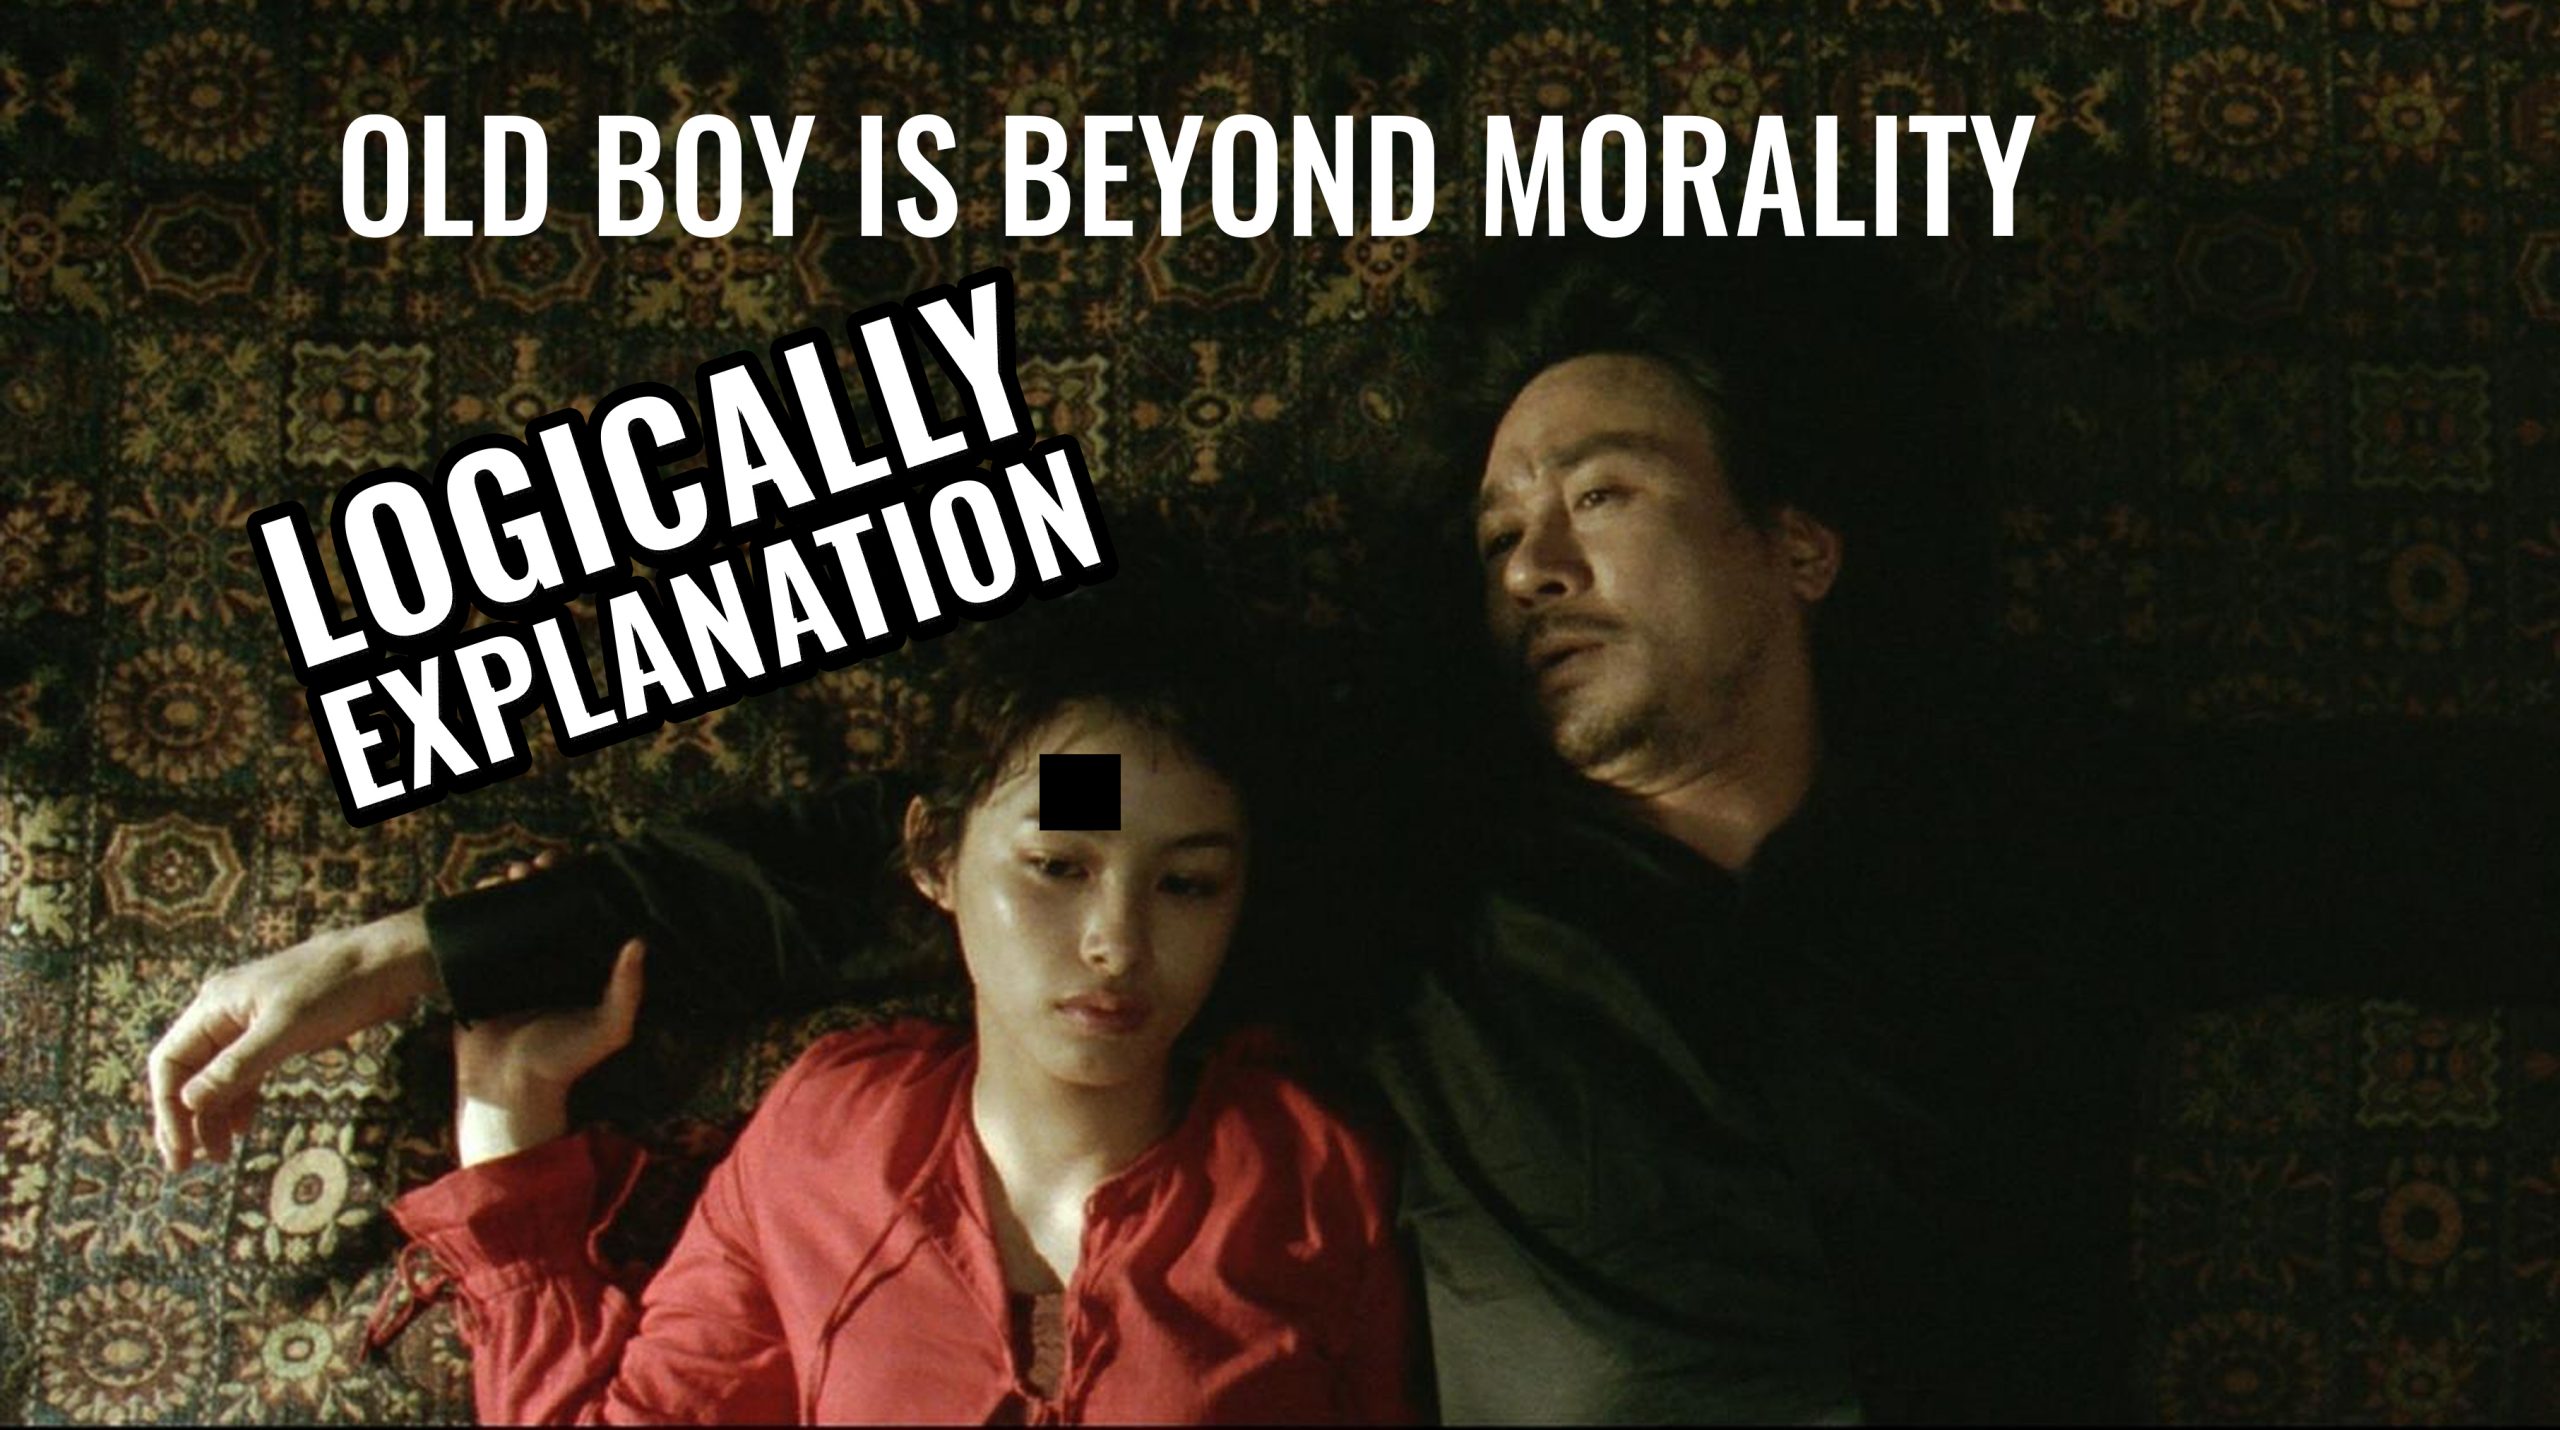 The Movie Old Boy Is Beyond Morality- Logically Explanation